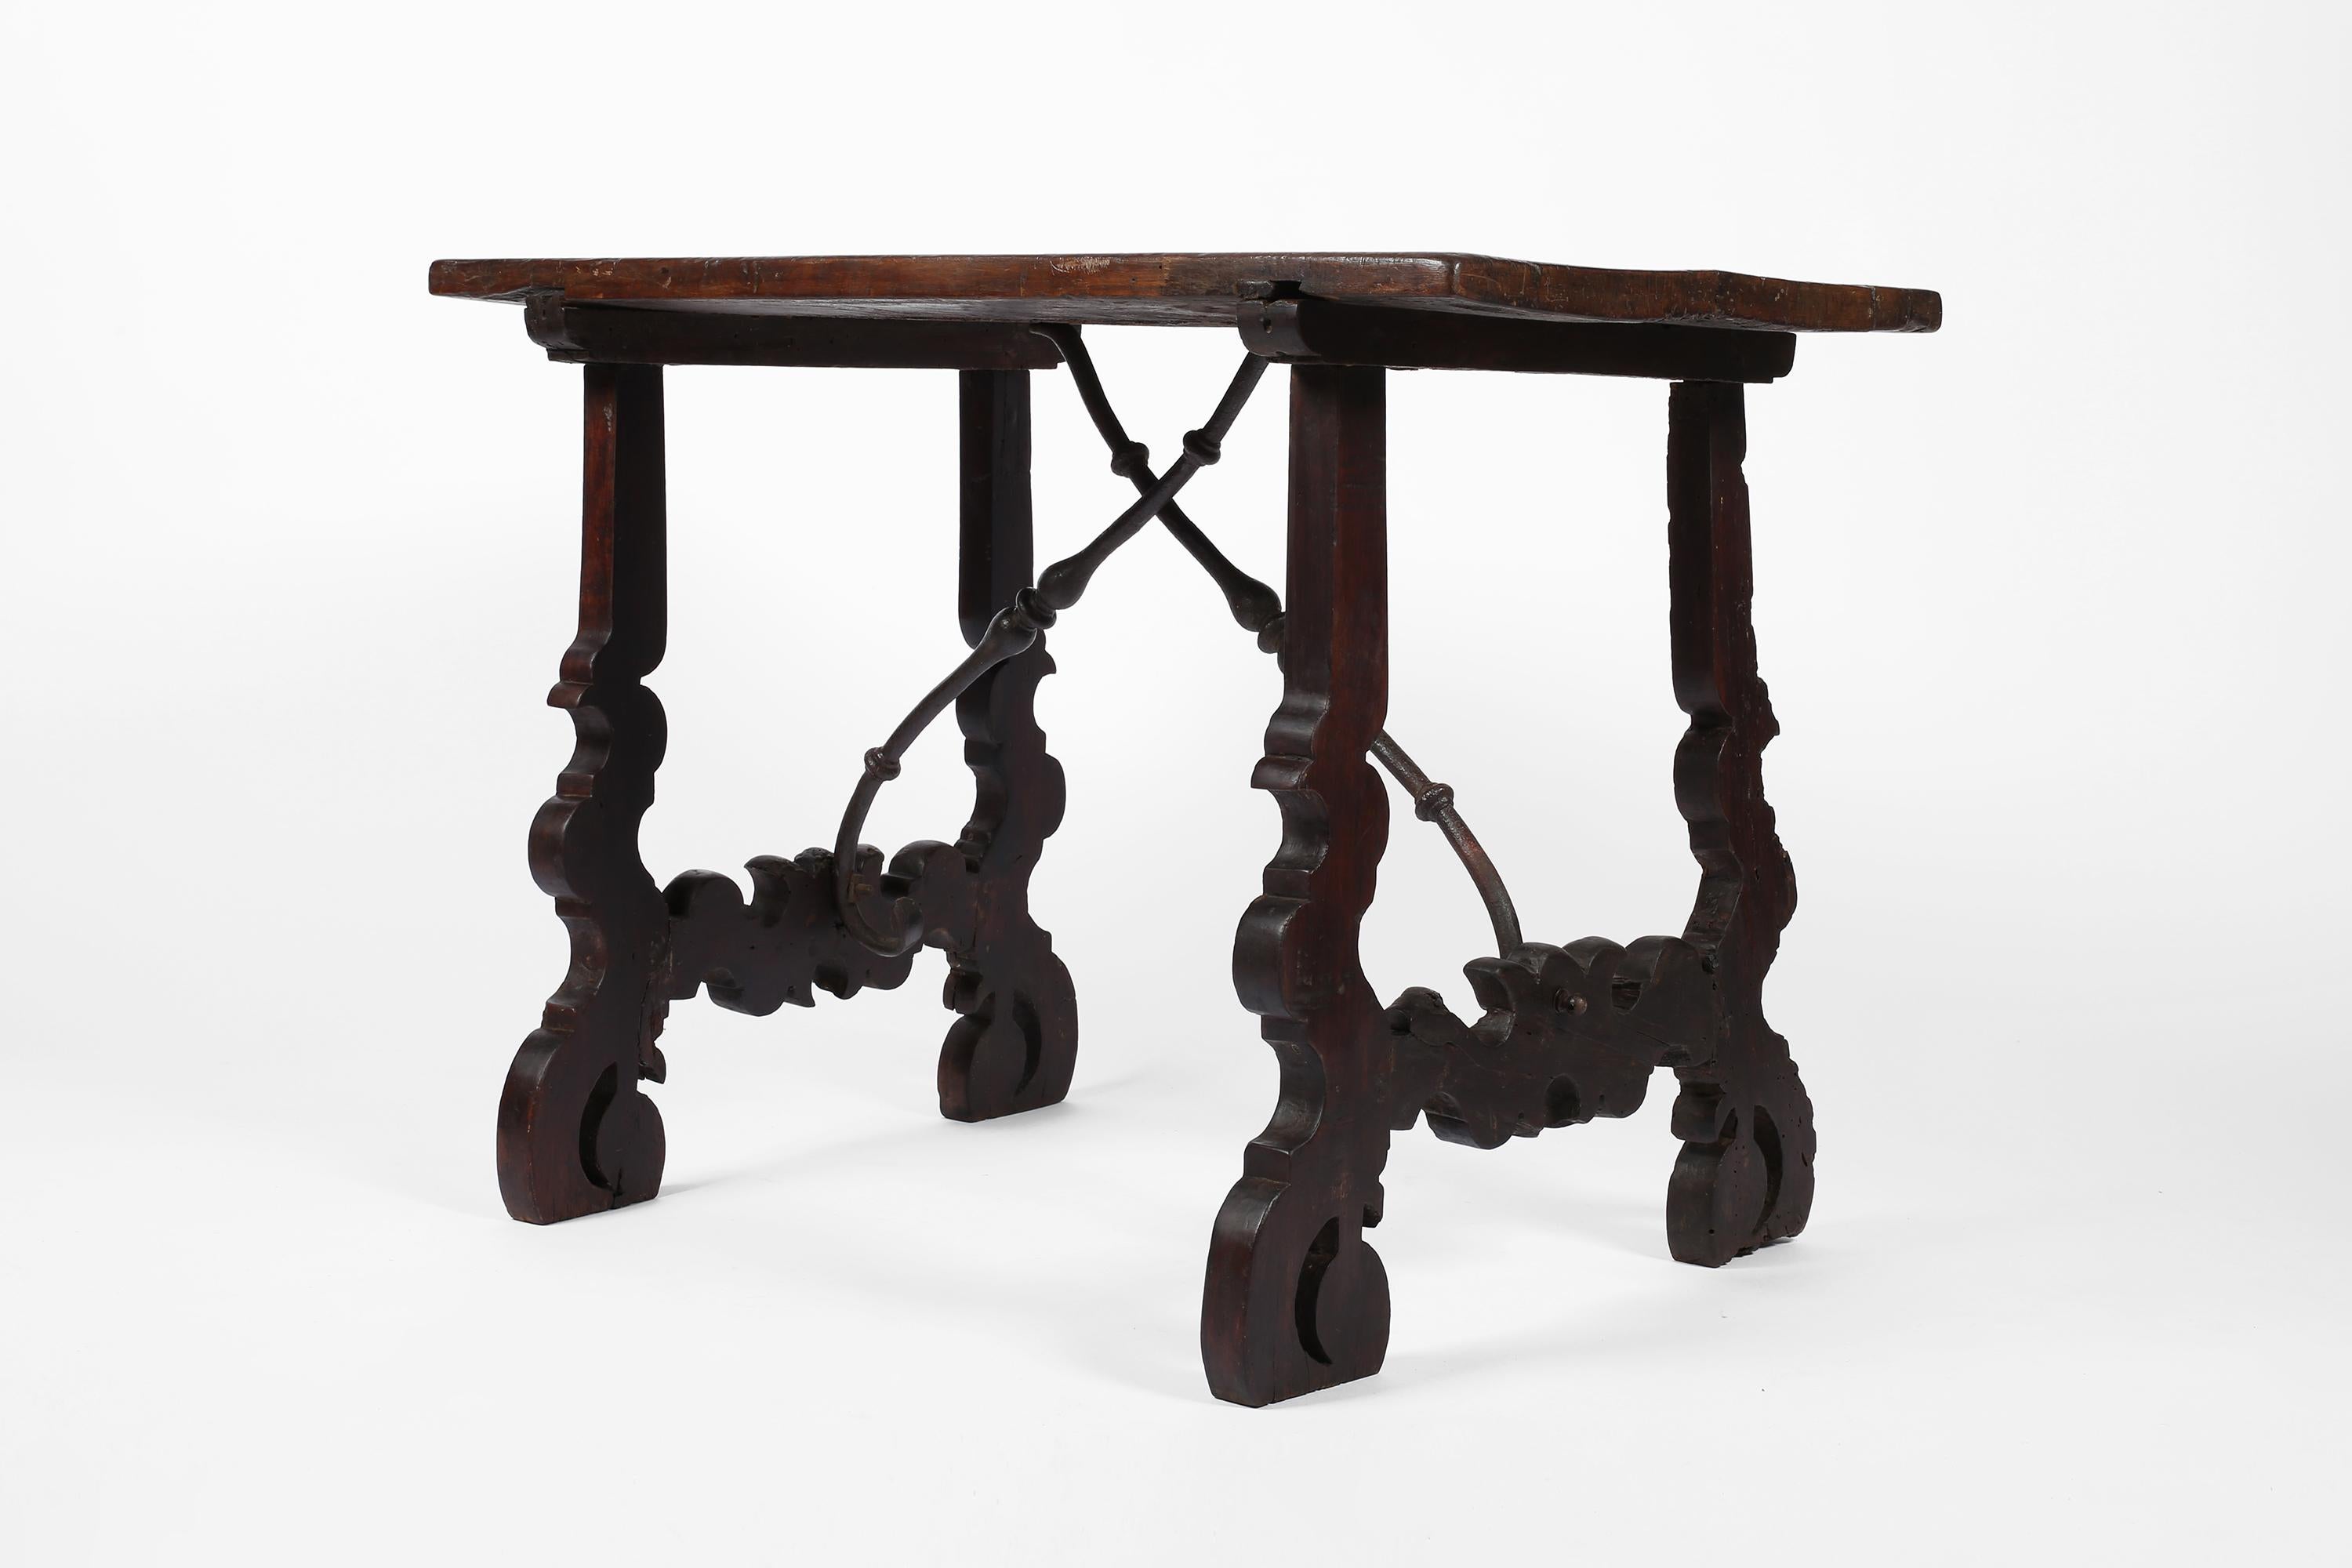 A charming 18th century side table, console or small desk in heavily patinated walnut timber. The characterful single plank top sitting on traditional decoratively carved legs, with forged iron stretchers. Spanish, c. 1750.